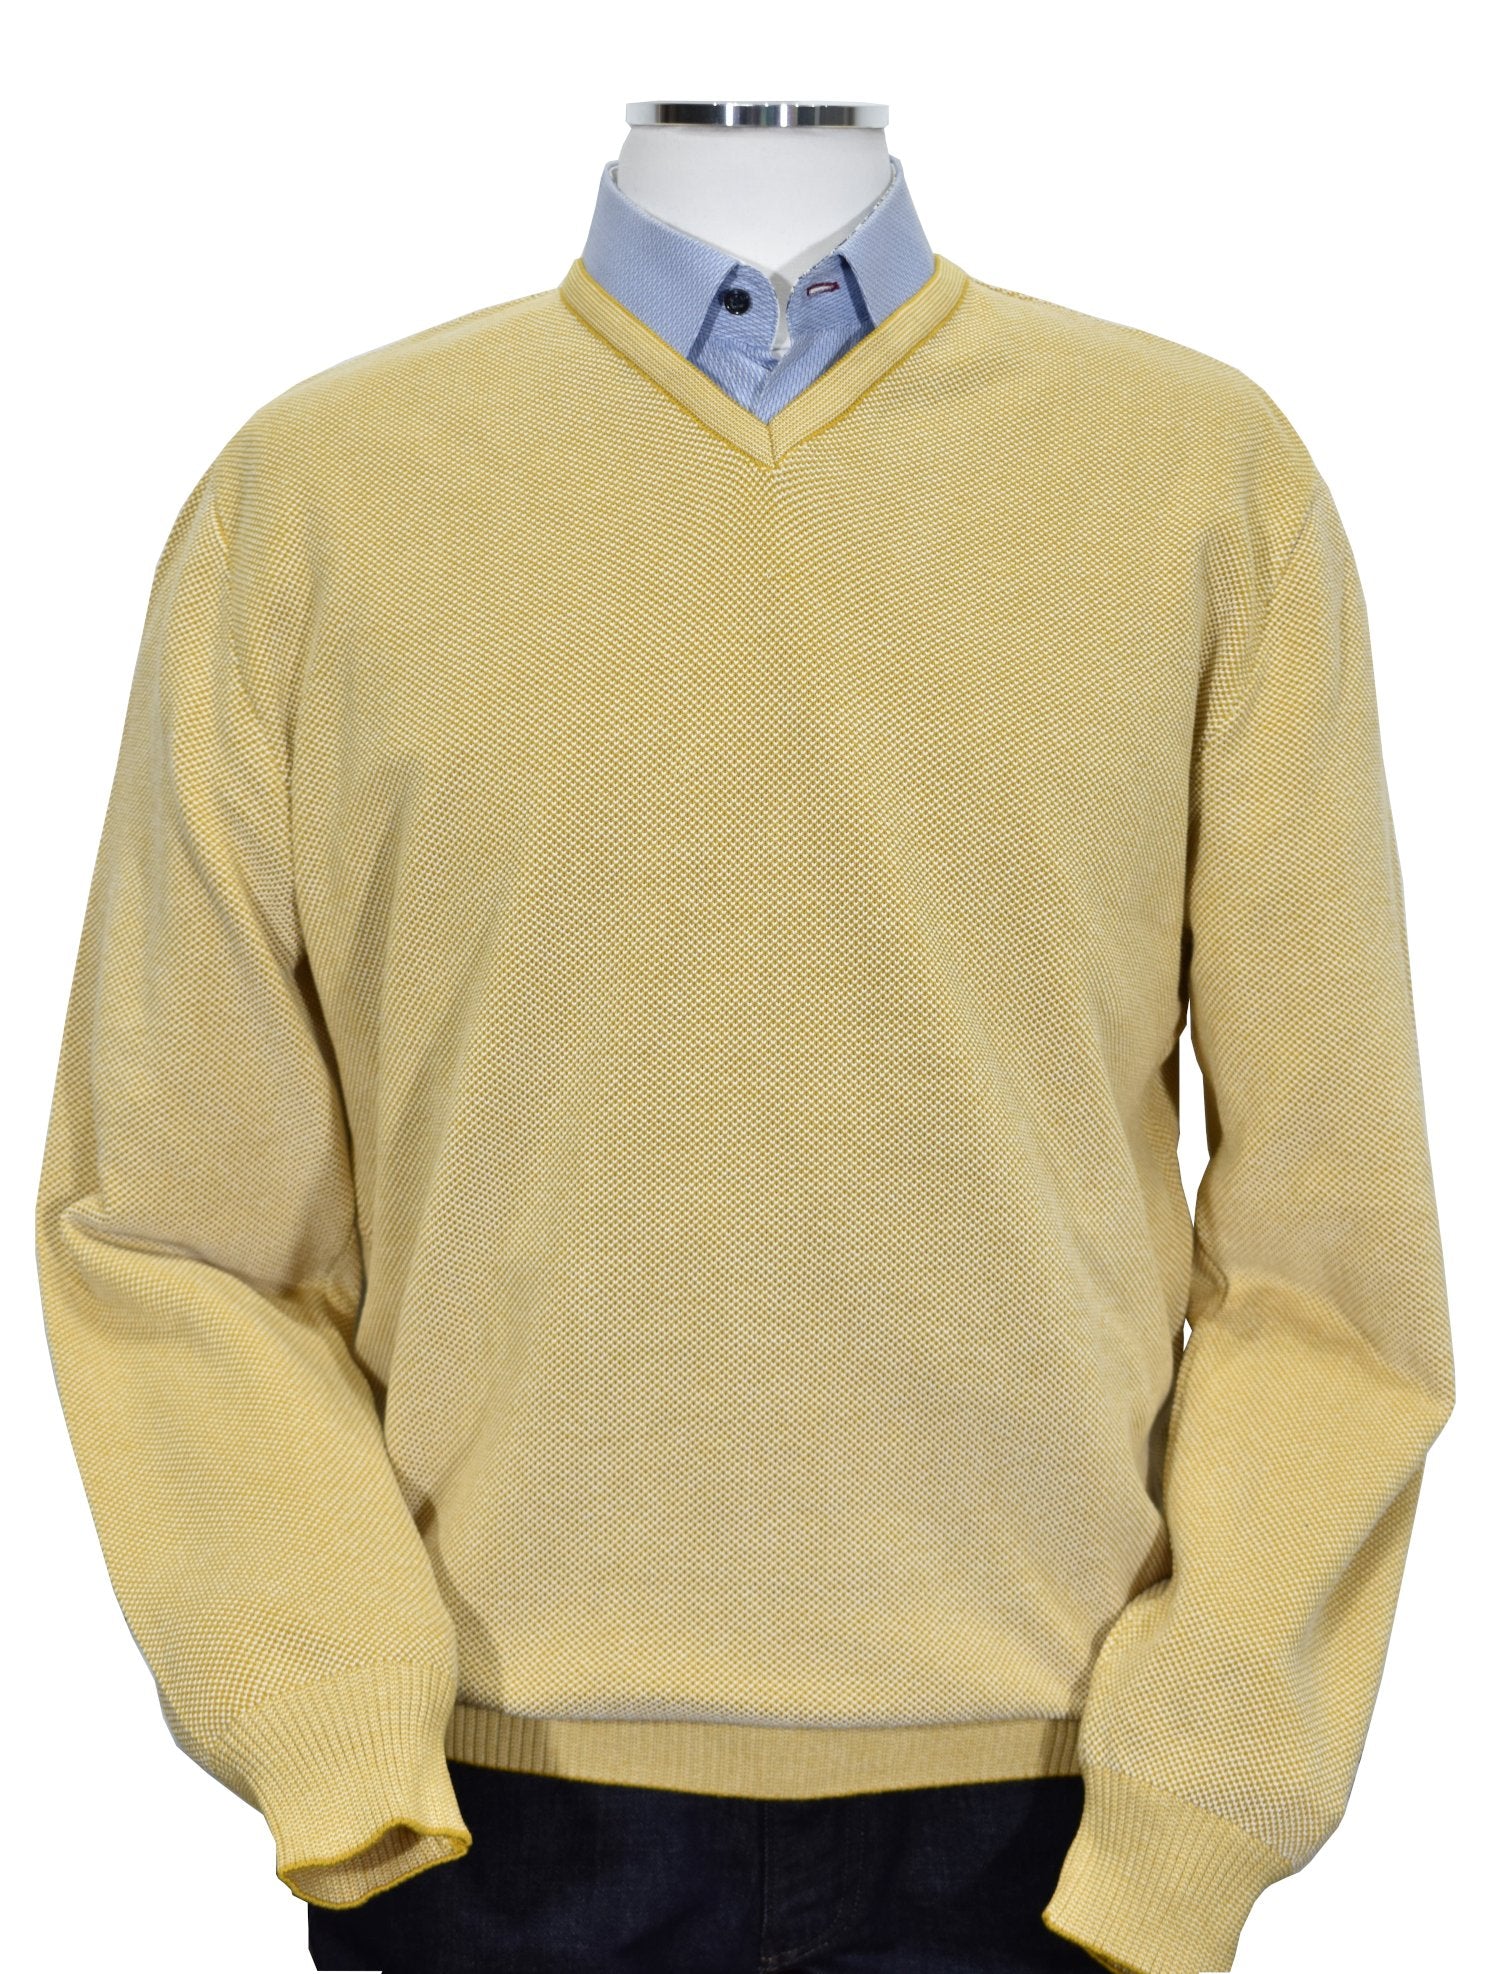 For something timeless and classic, look no further than our signature v-neck light layer, made from ultra-soft Italian cotton with a two-color mixed yarn look for added depth. A perfect complement for cool days, boasting classic banded cuffs and a waist band as well as a comfortable fit.   Italian Popcorn Stitch Sweater by Marcello.